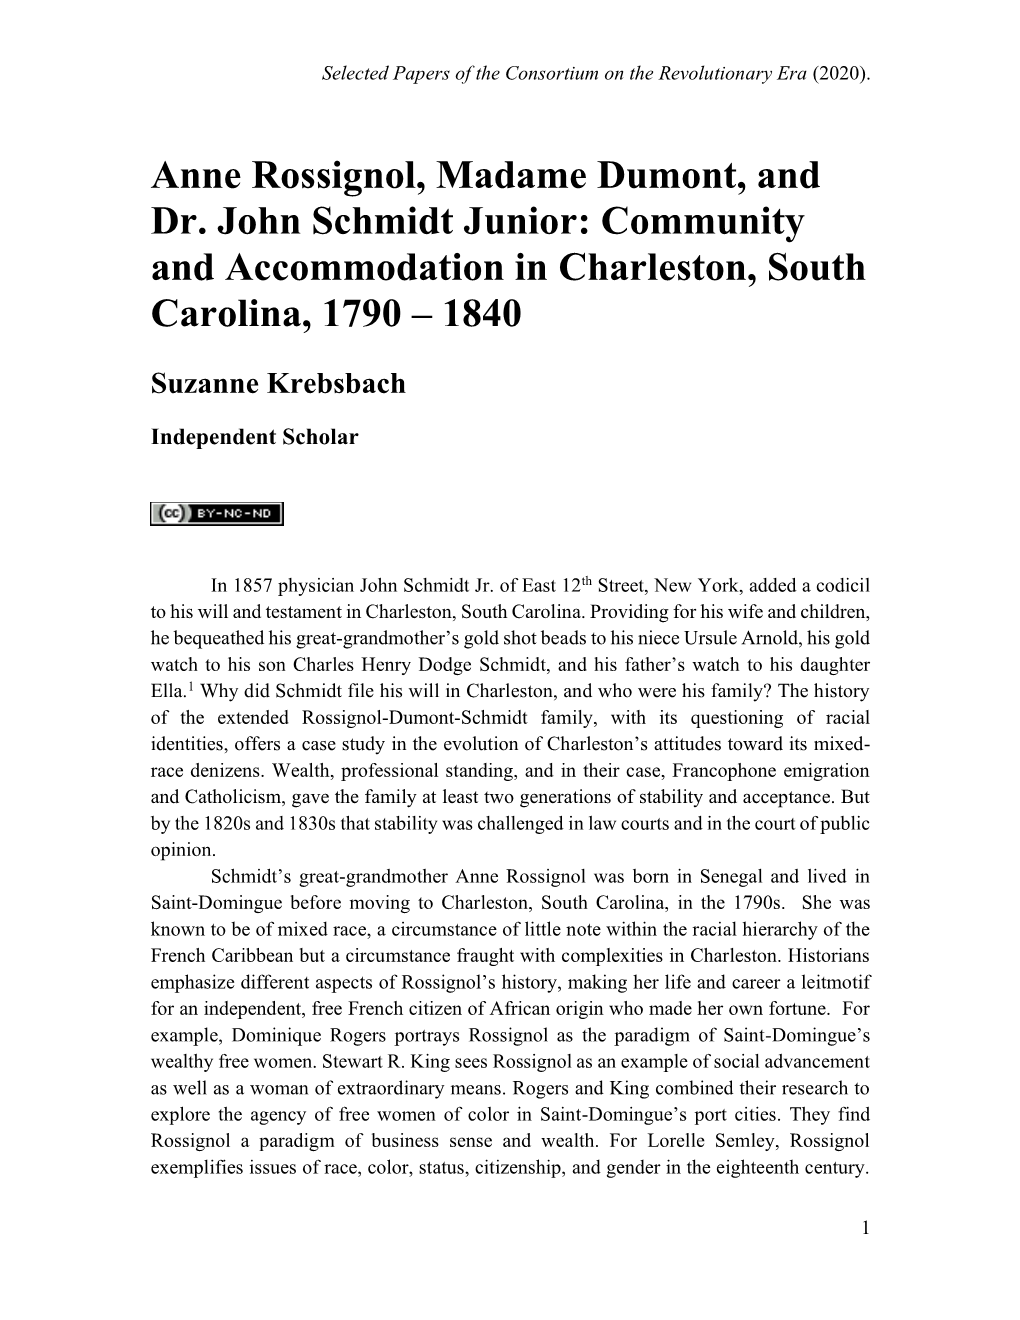 Anne Rossignol, Madame Dumont, and Dr. John Schmidt Junior: Community and Accommodation in Charleston, South Carolina, 1790 – 1840